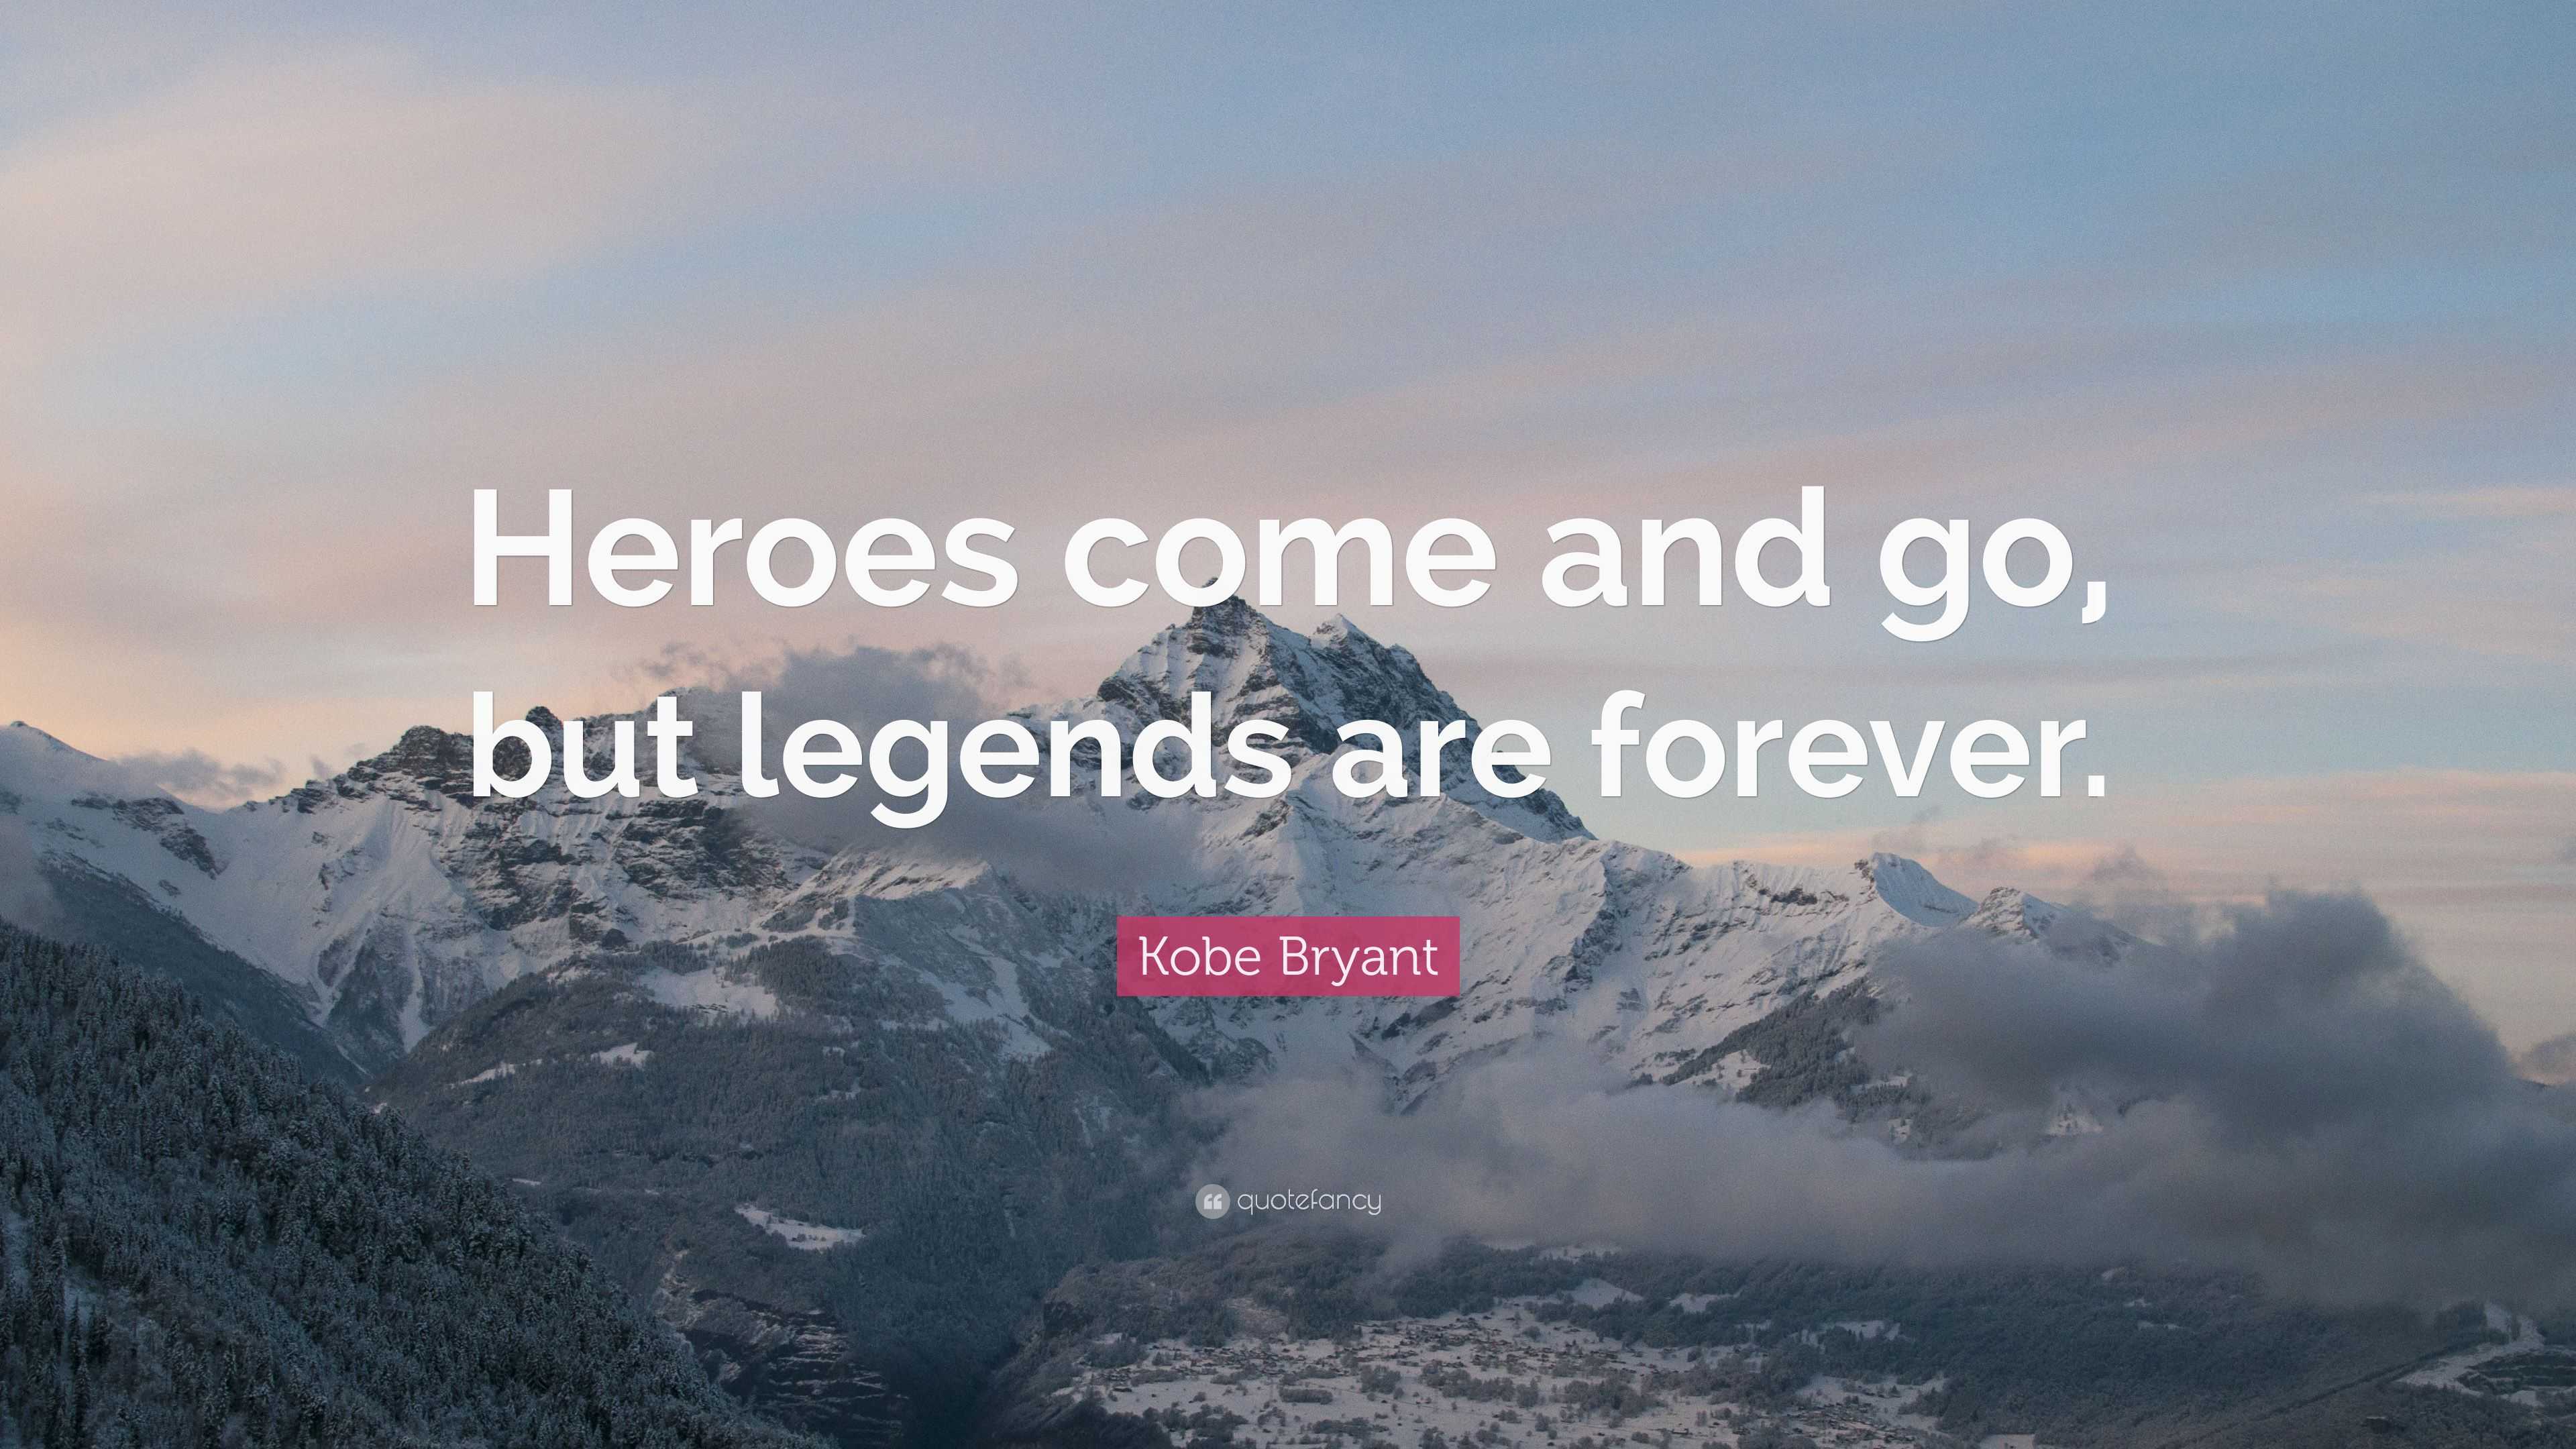 Heroes come and go, but legends are forever. - IdleHearts